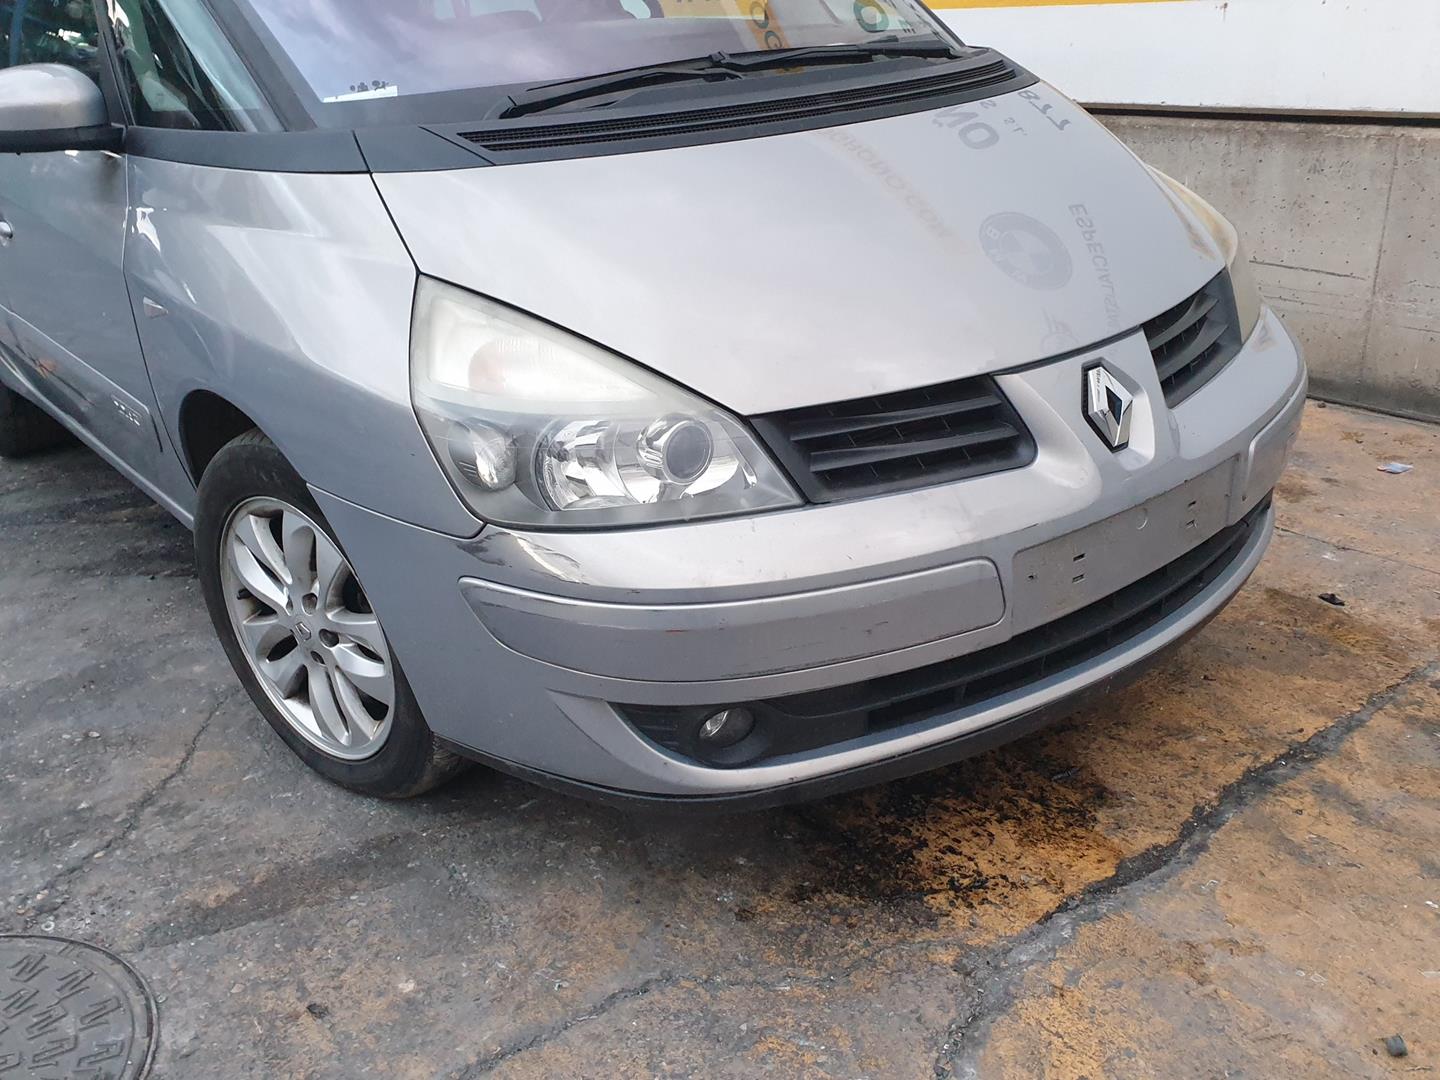 RENAULT Espace 4 generation (2002-2014) Front Right Fender 7701473587, 7701473587, COLORDORADOTEA19 19855331